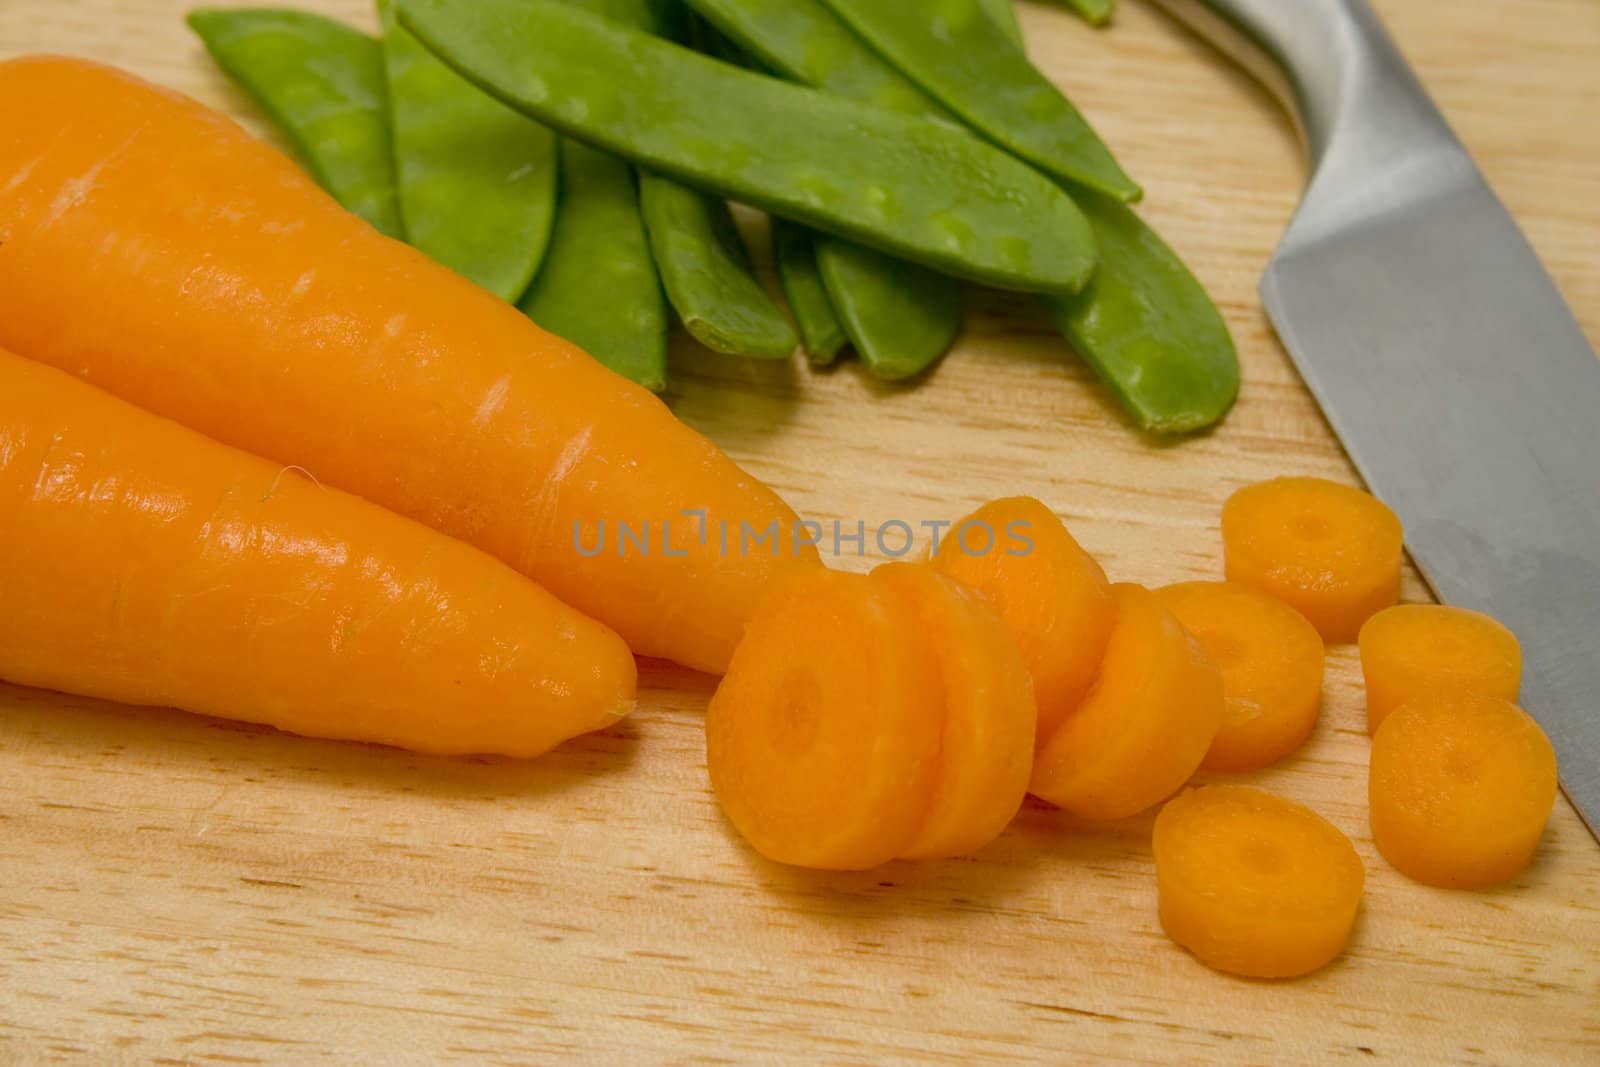 Carrots and peas on a chopping board